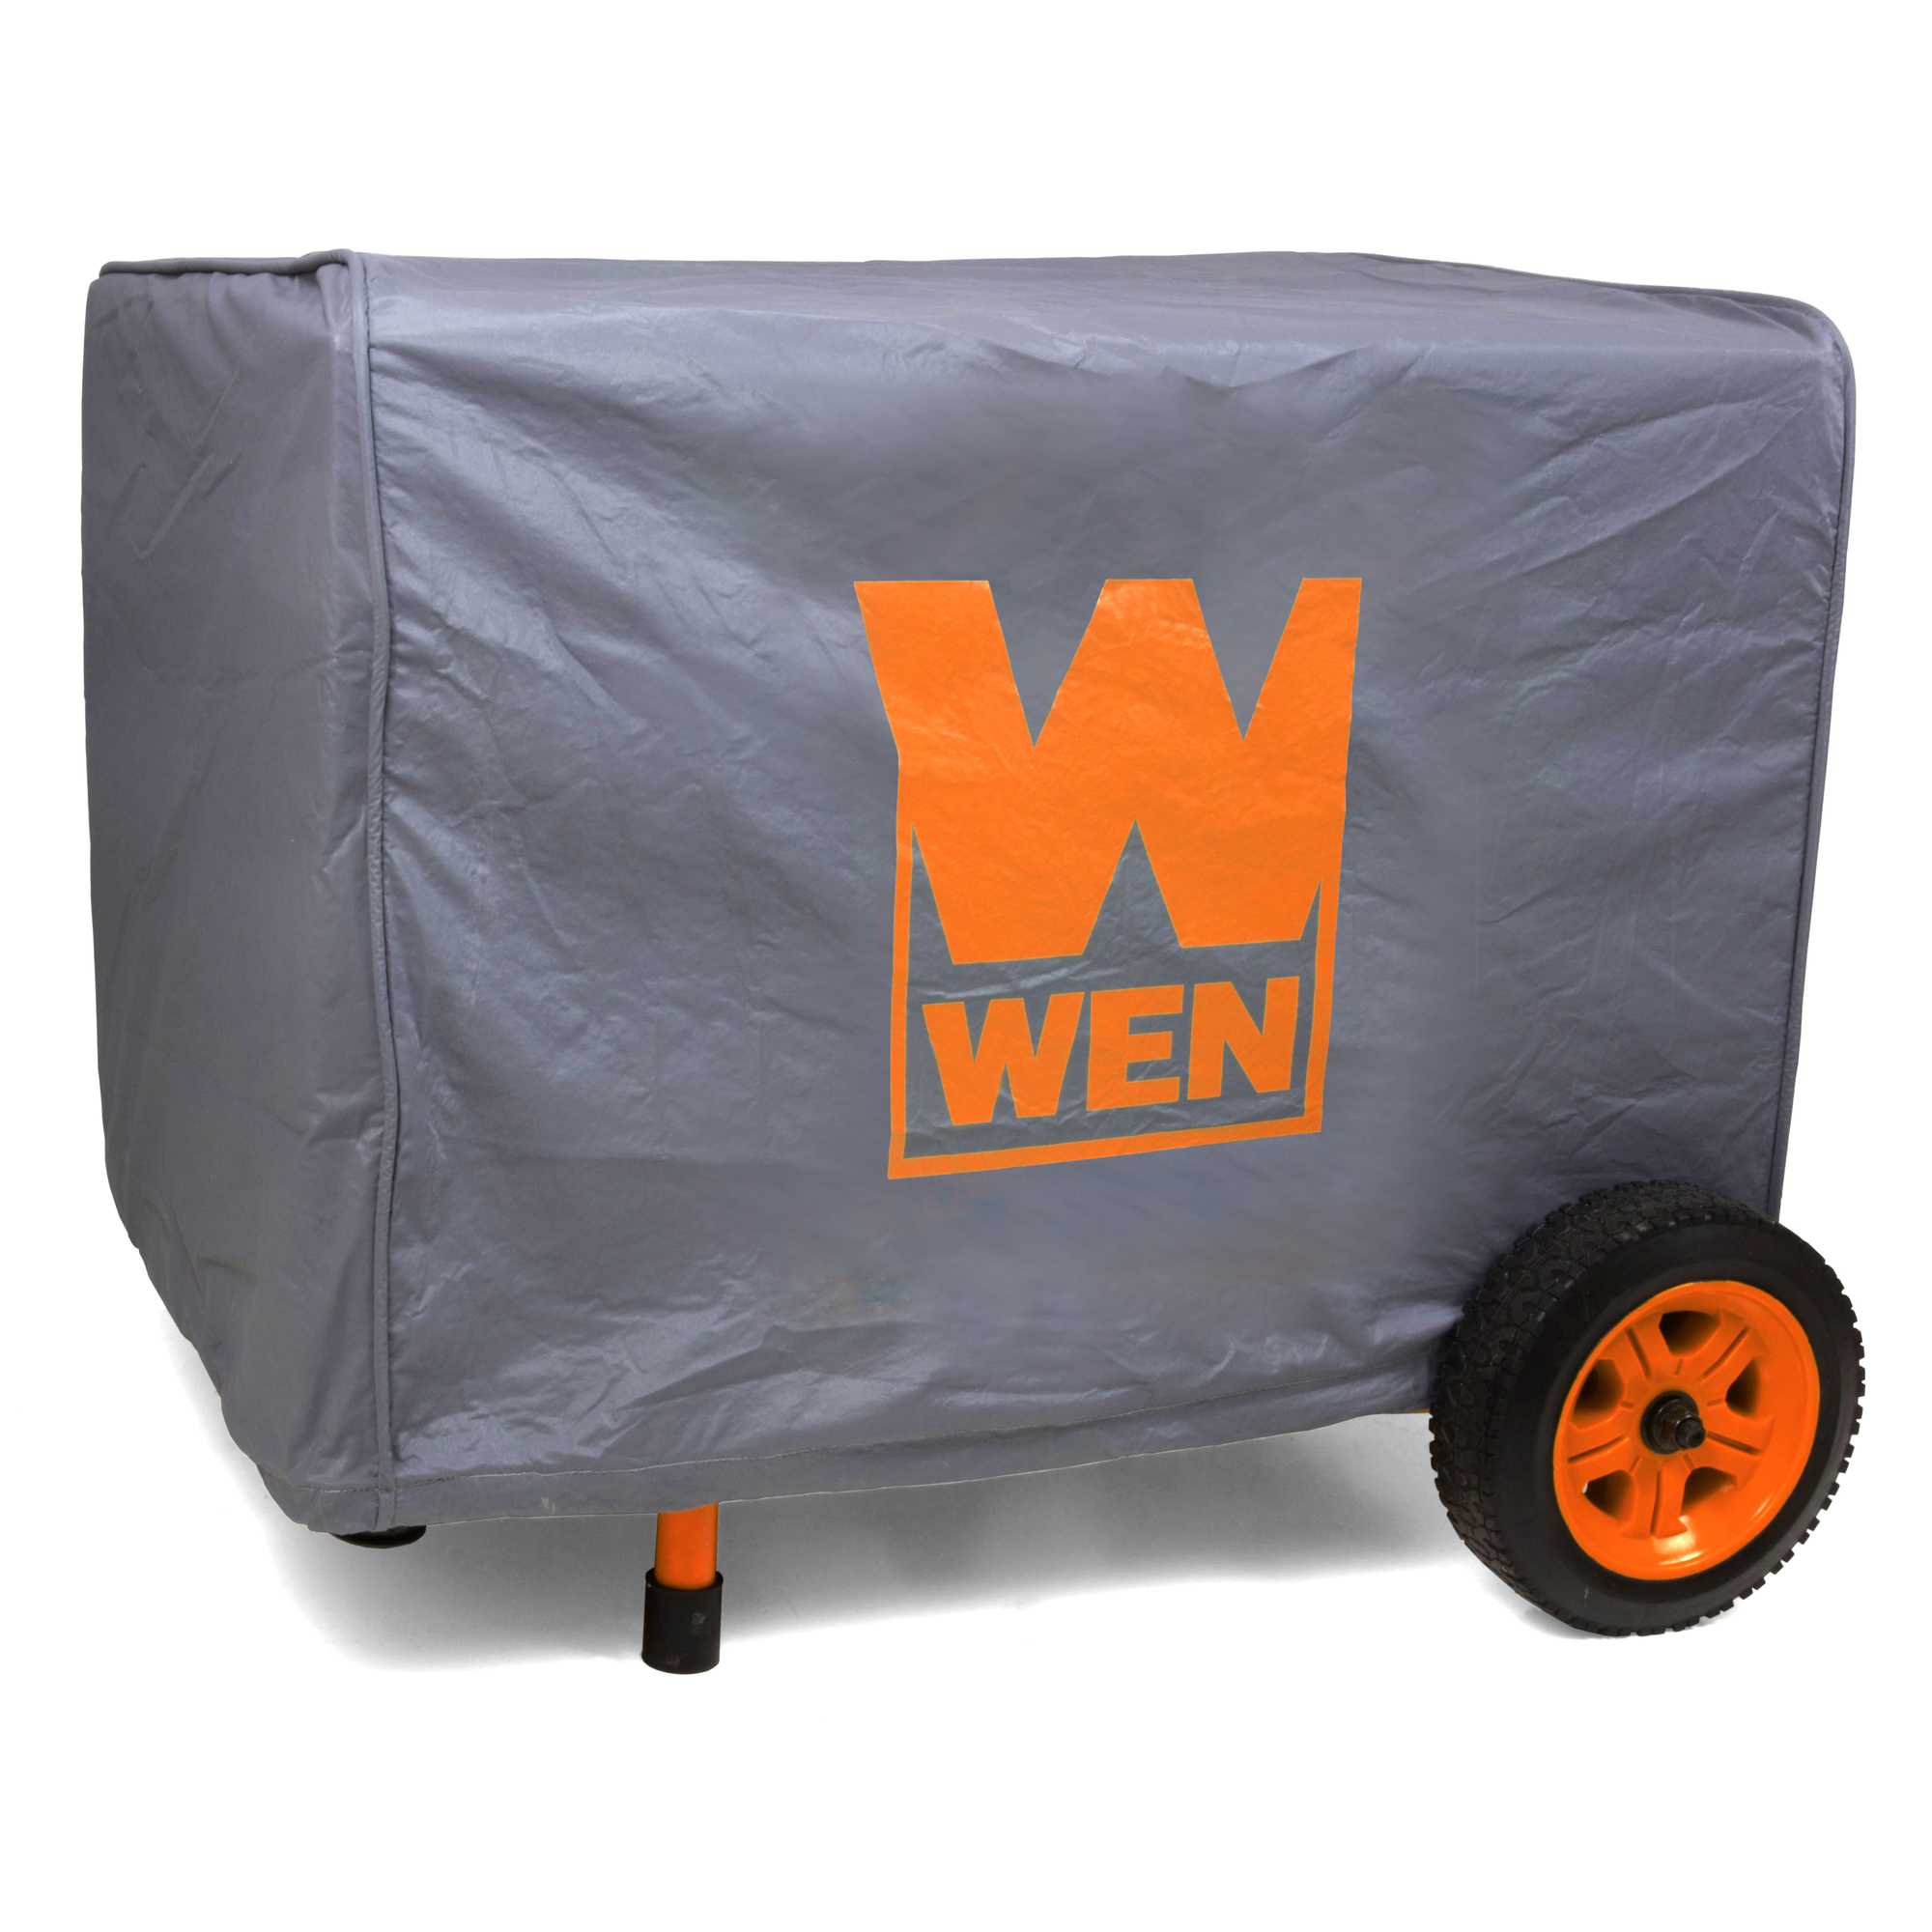 WEN, Weatherproof Generator Cover, Material Vinyl, Closure Type Other, Compatible With Other, Model GNC110